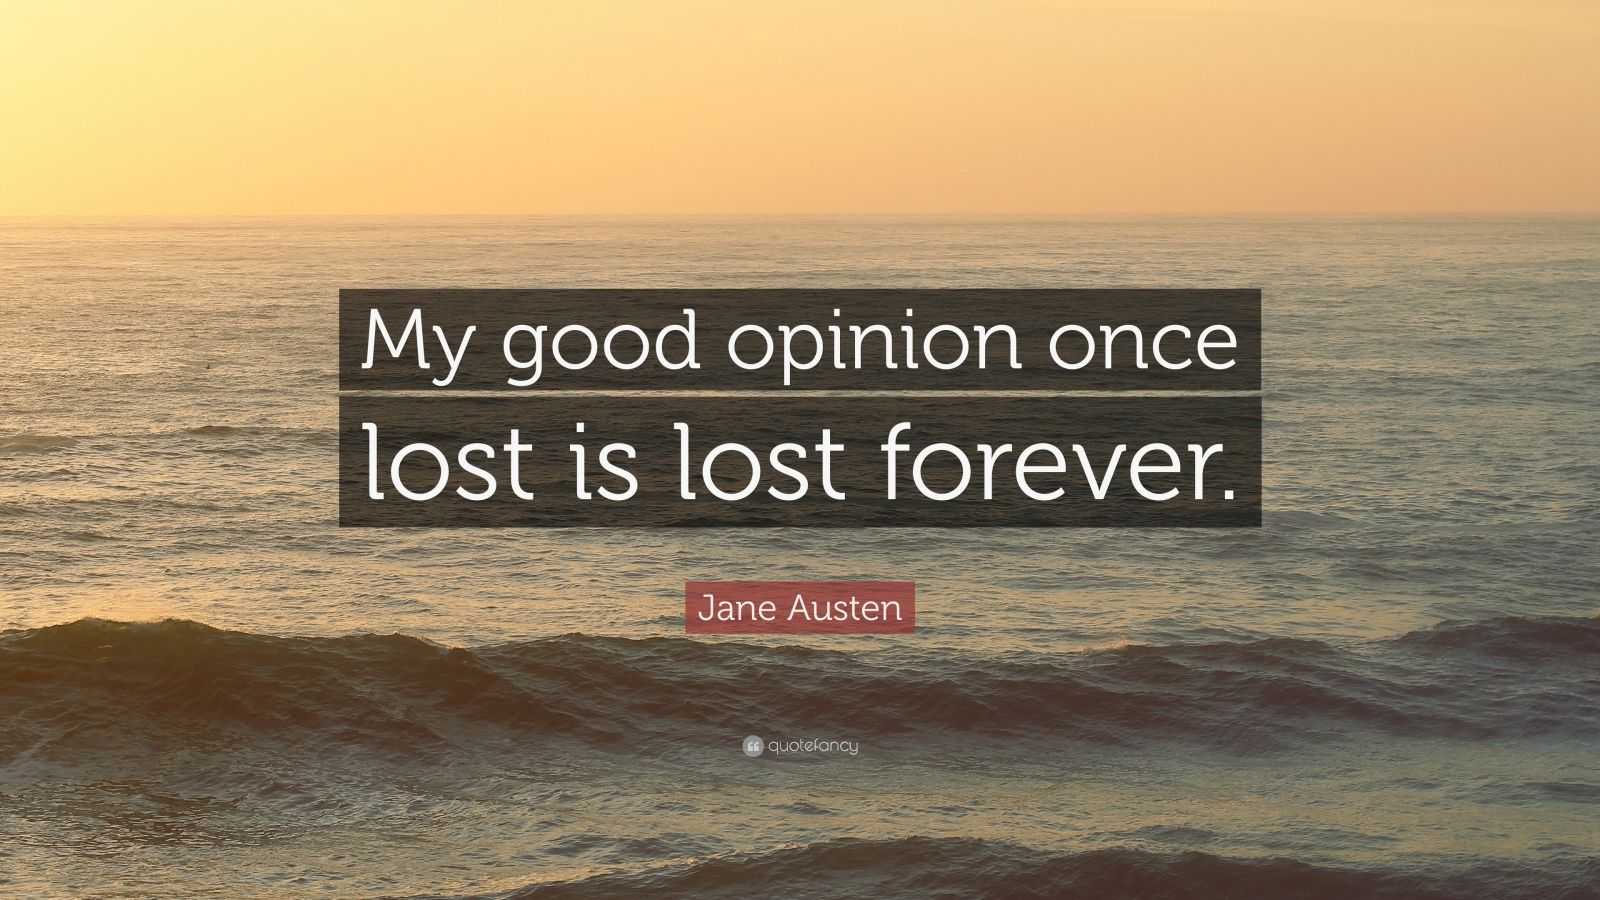 Jane Austen Quote: "My good opinion once lost is lost ...